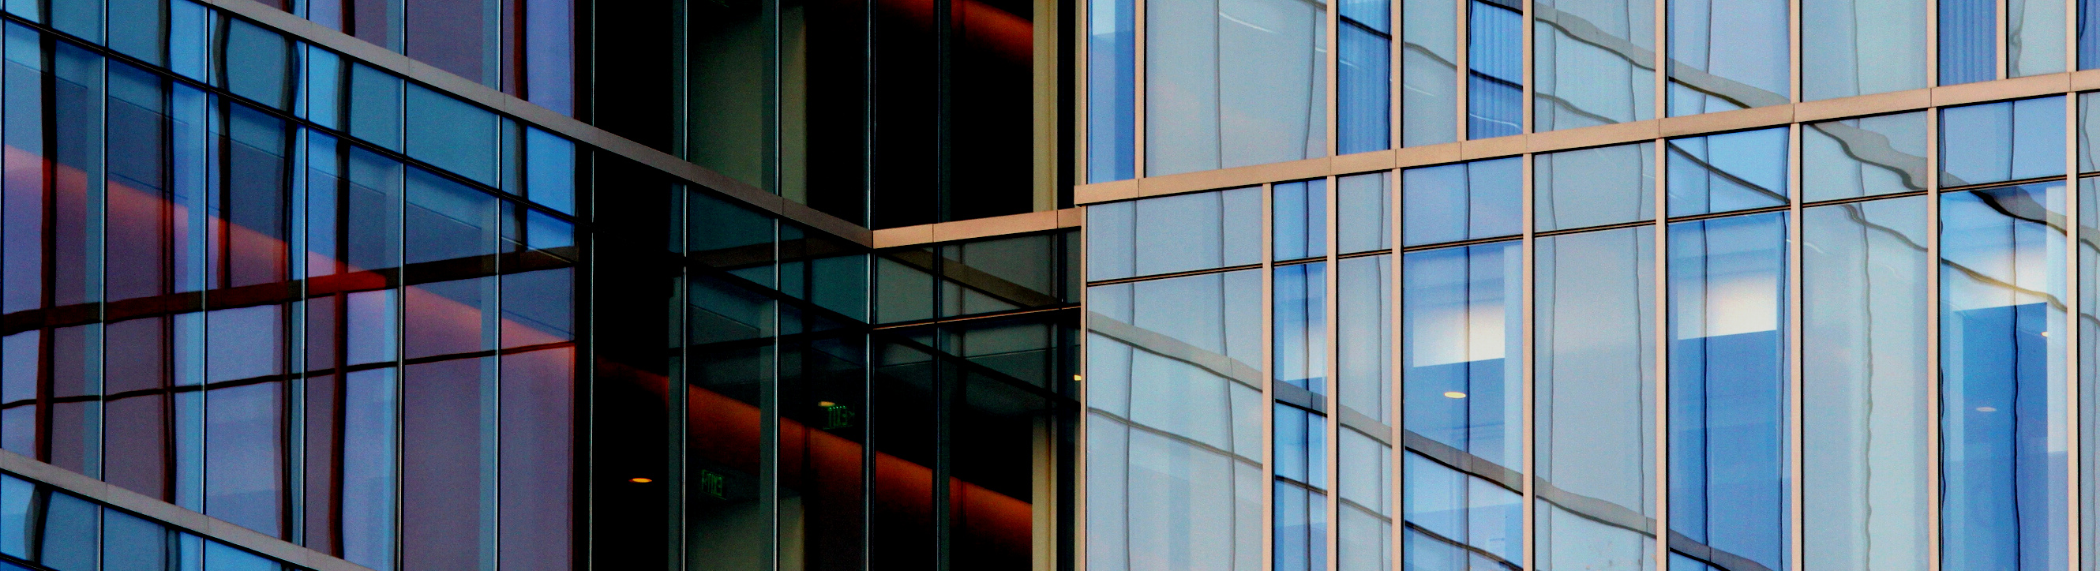 Abstract blue modern building